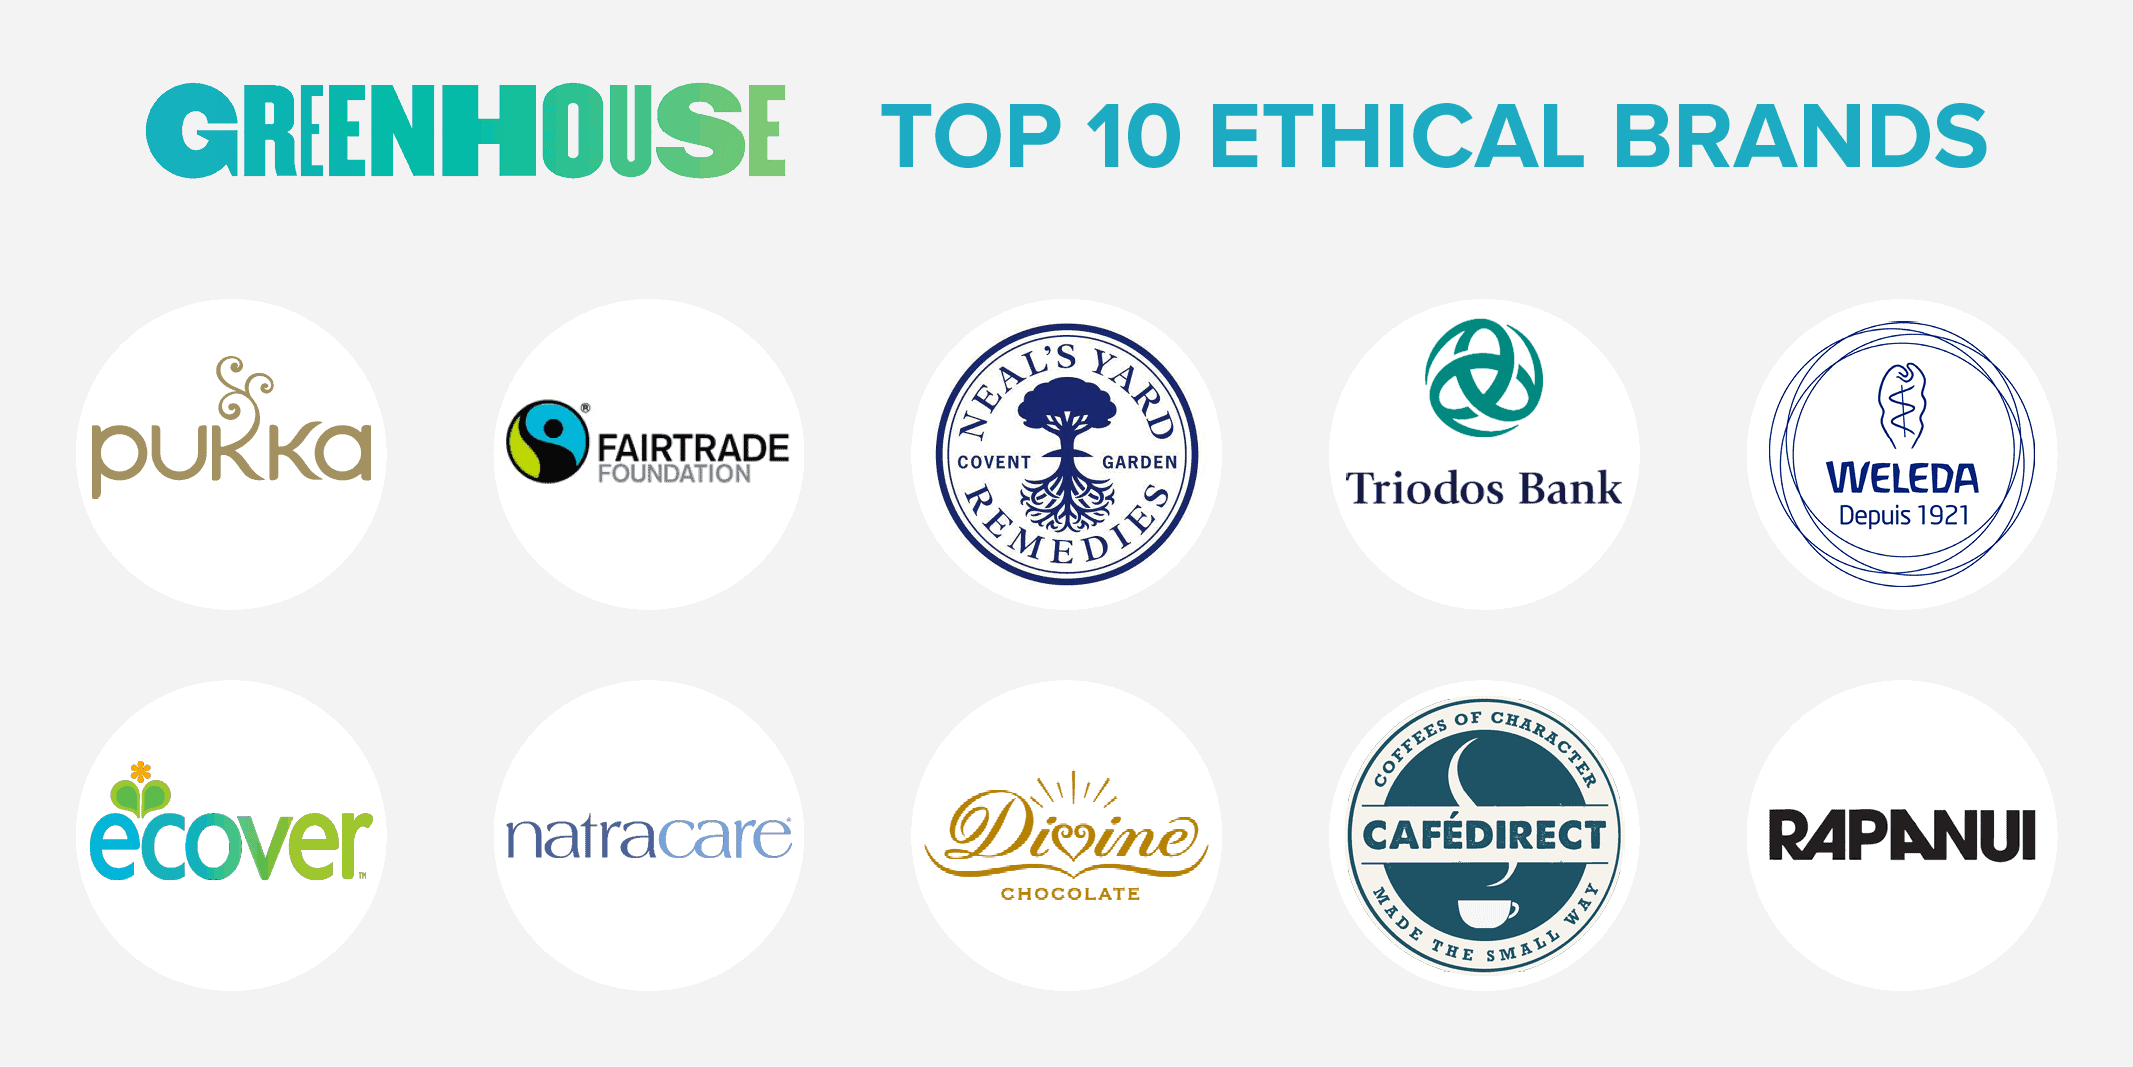 Top 10 ethical brands